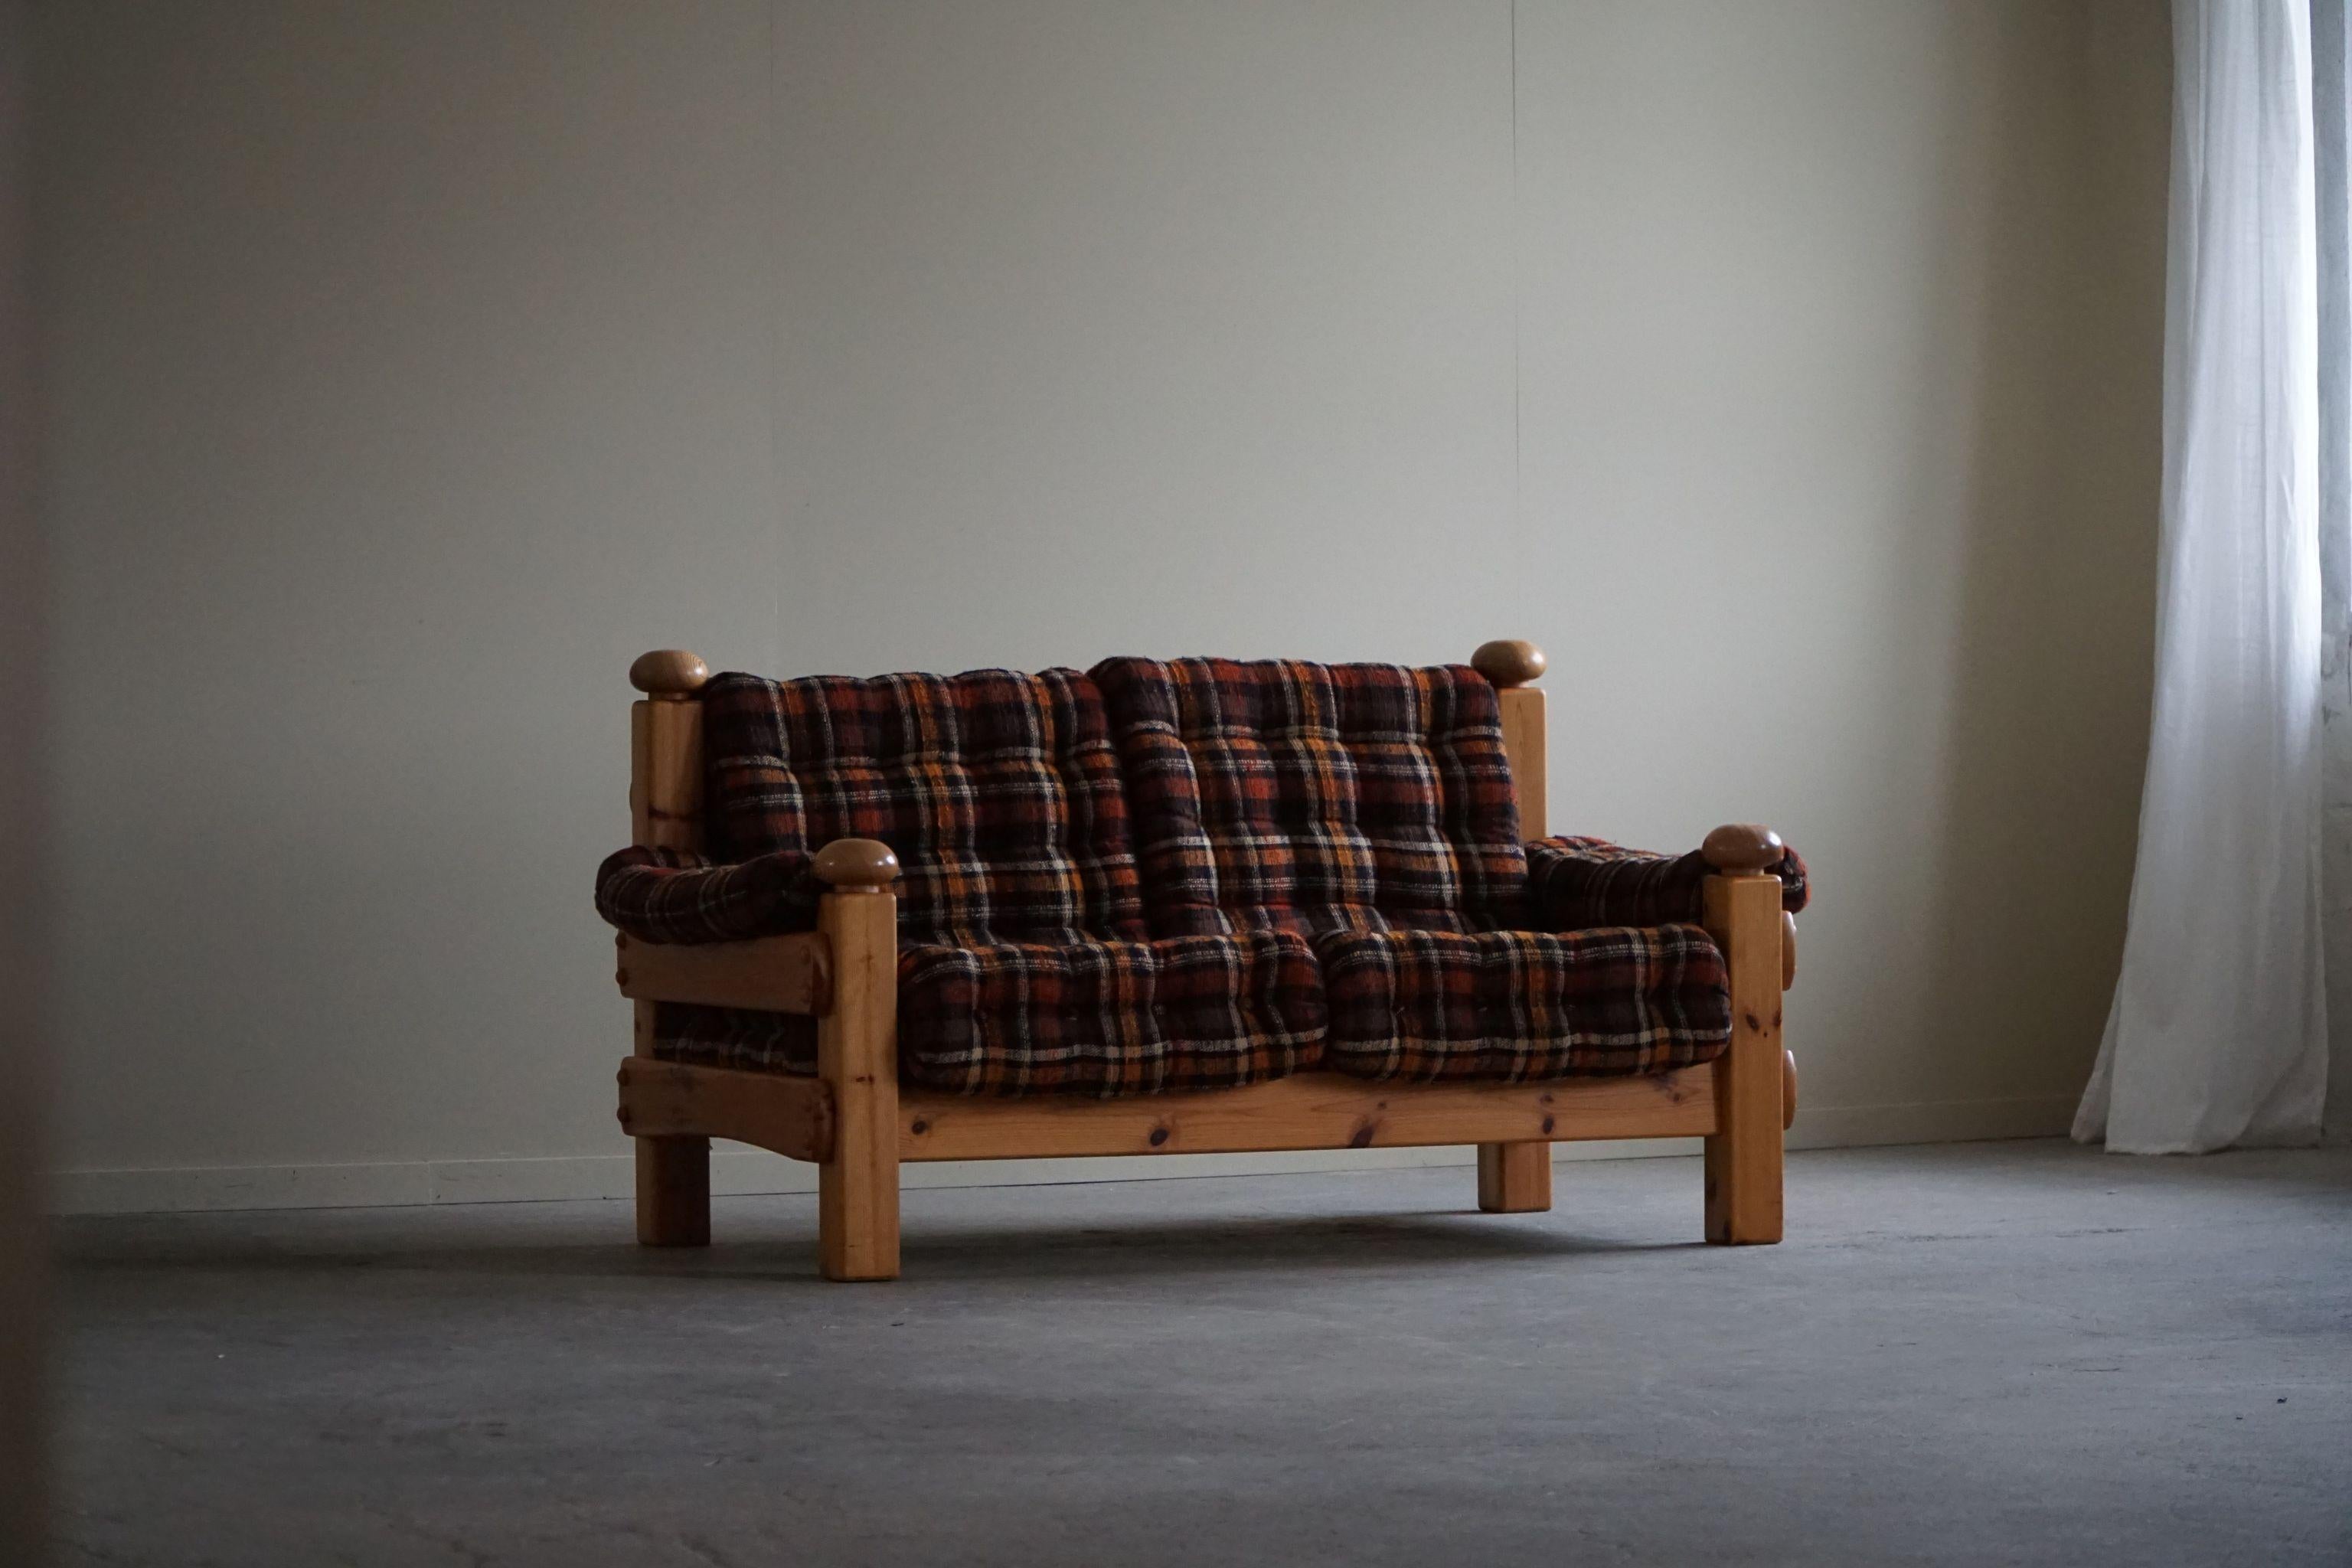 Two Seater Brutalist Sofa in Solid Pine, Swedish Modern, Made in the 1970s For Sale 4